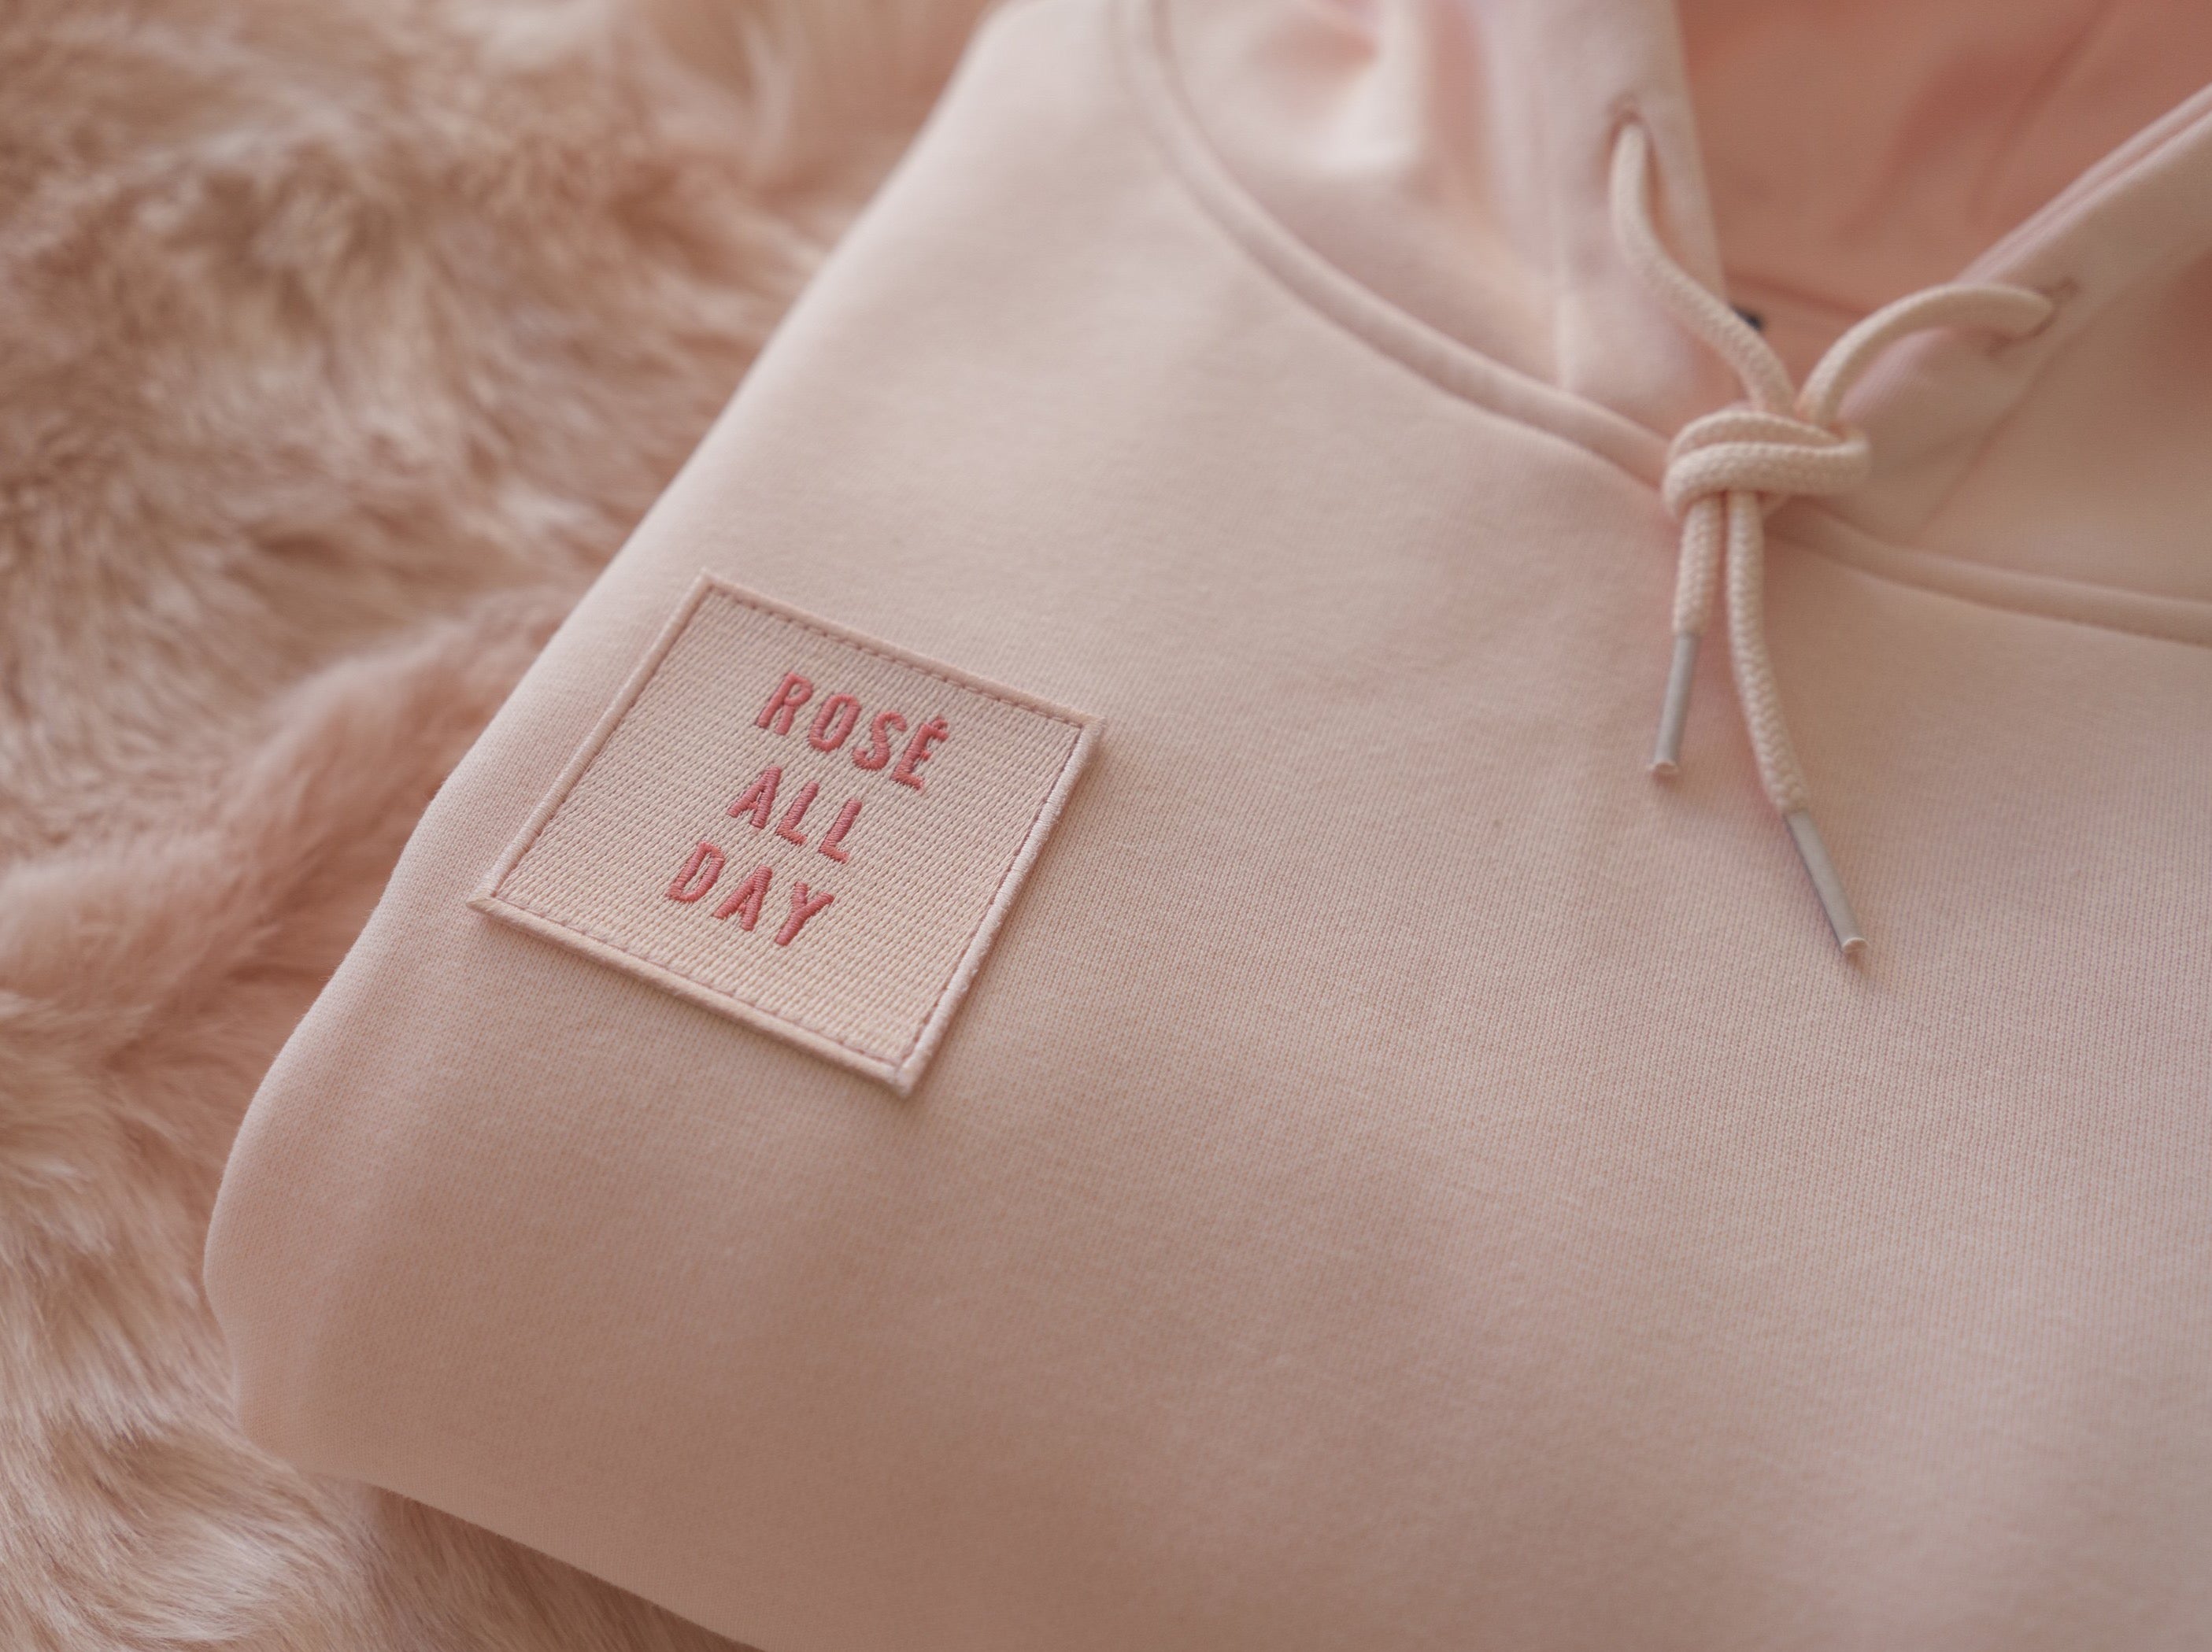 ROSÉ ALL DAY PINK HOODIE – By Margaux